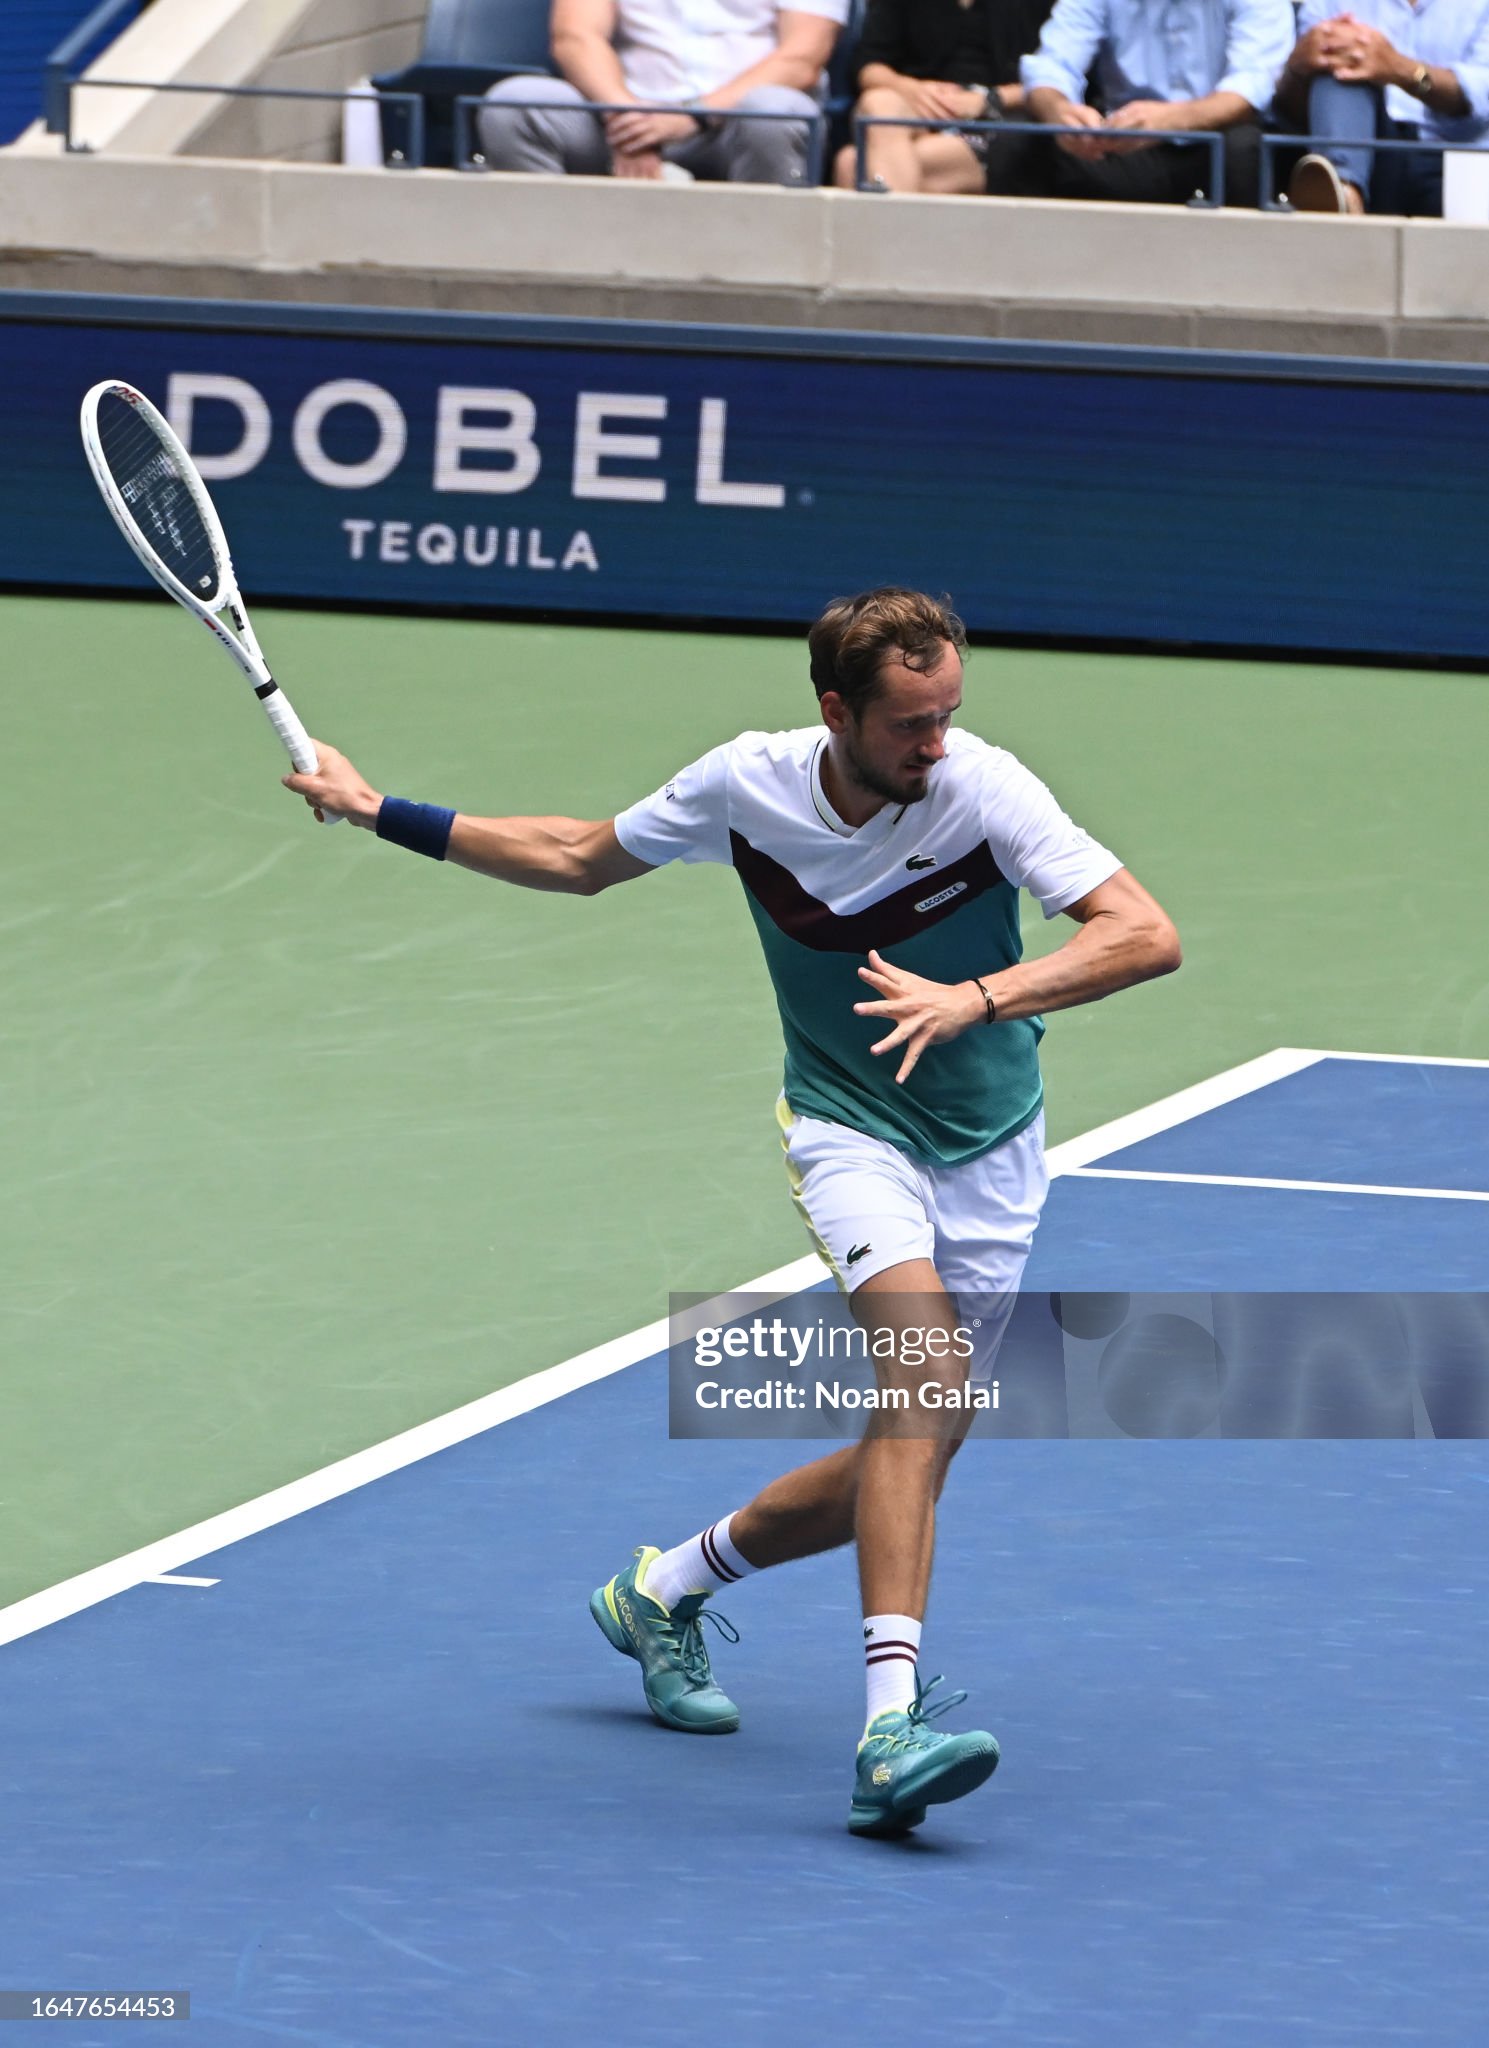 maestro-dobel-tequila-first-official-tequila-of-the-u-s-open.jpg